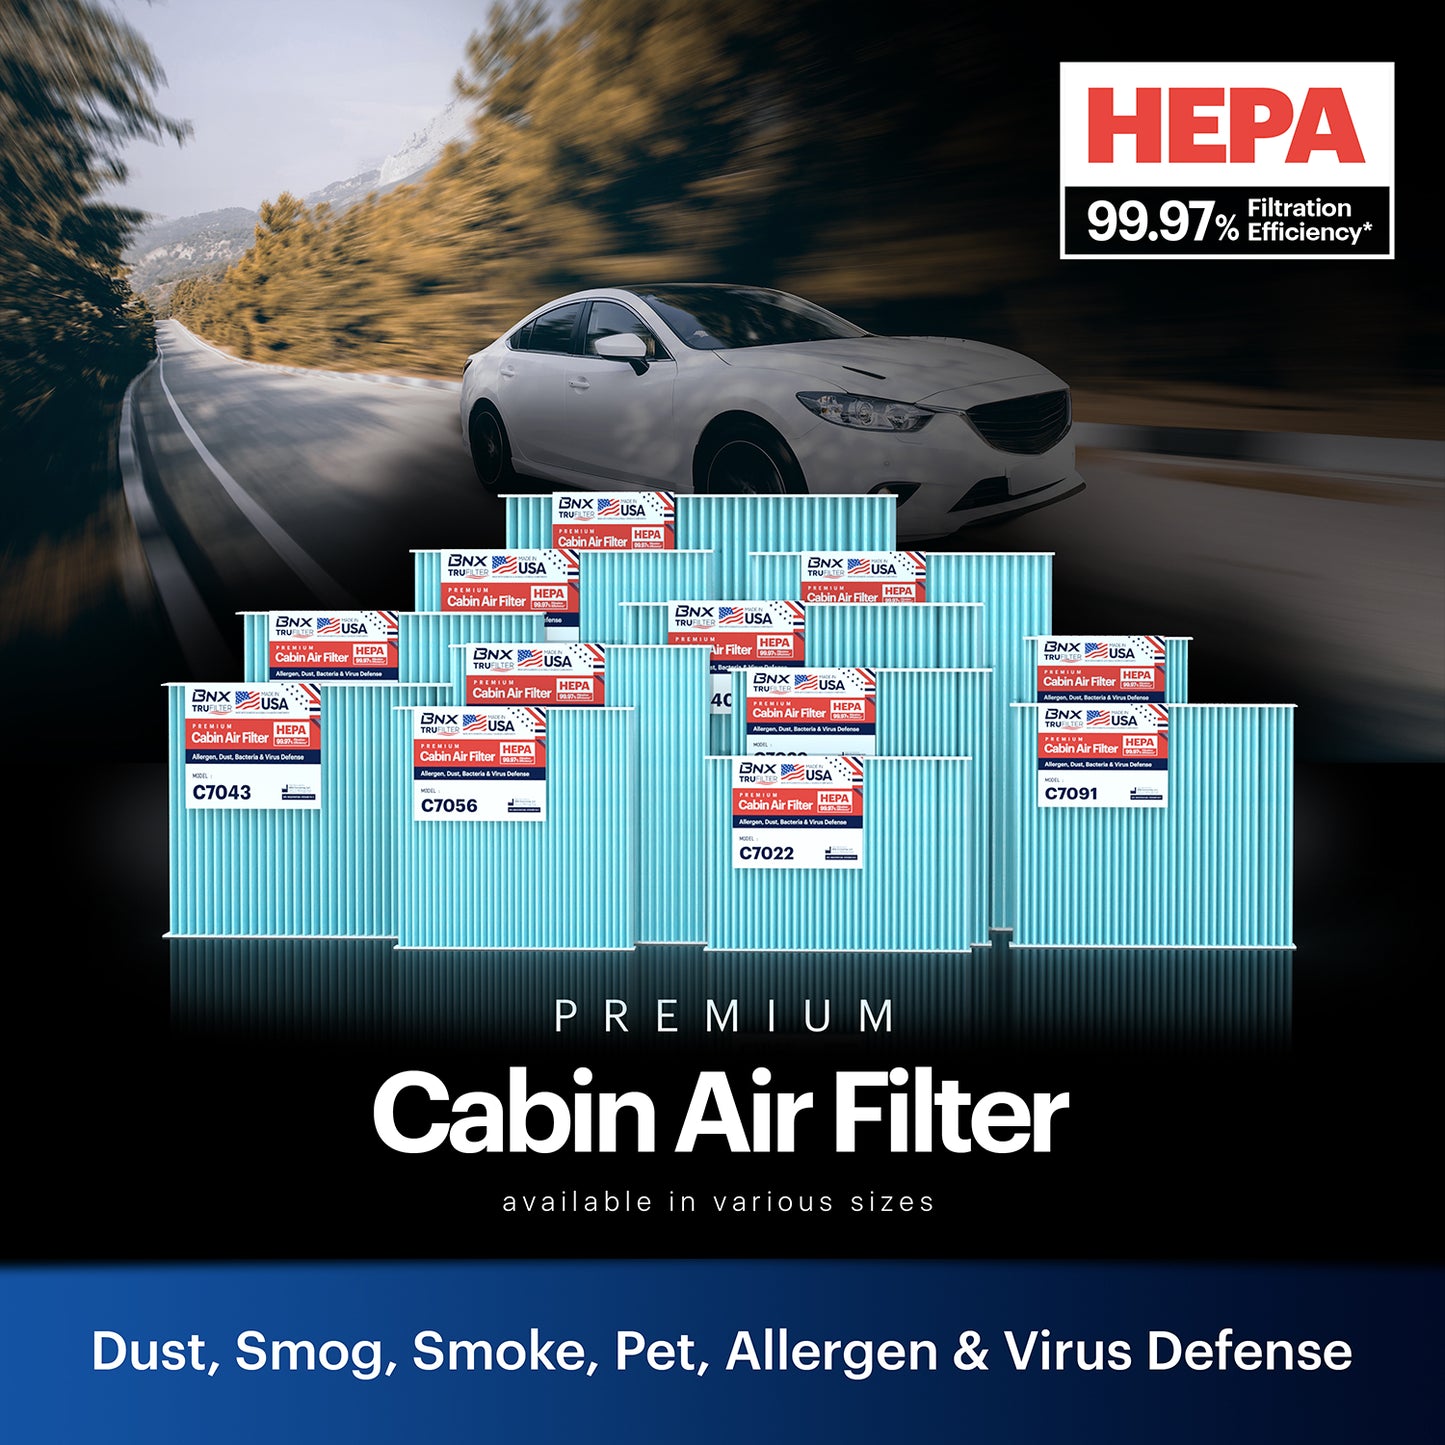 BNX TruFilter C7020 Cabin Air Filter, HEPA 99.97%, Compatible With Kia Soul